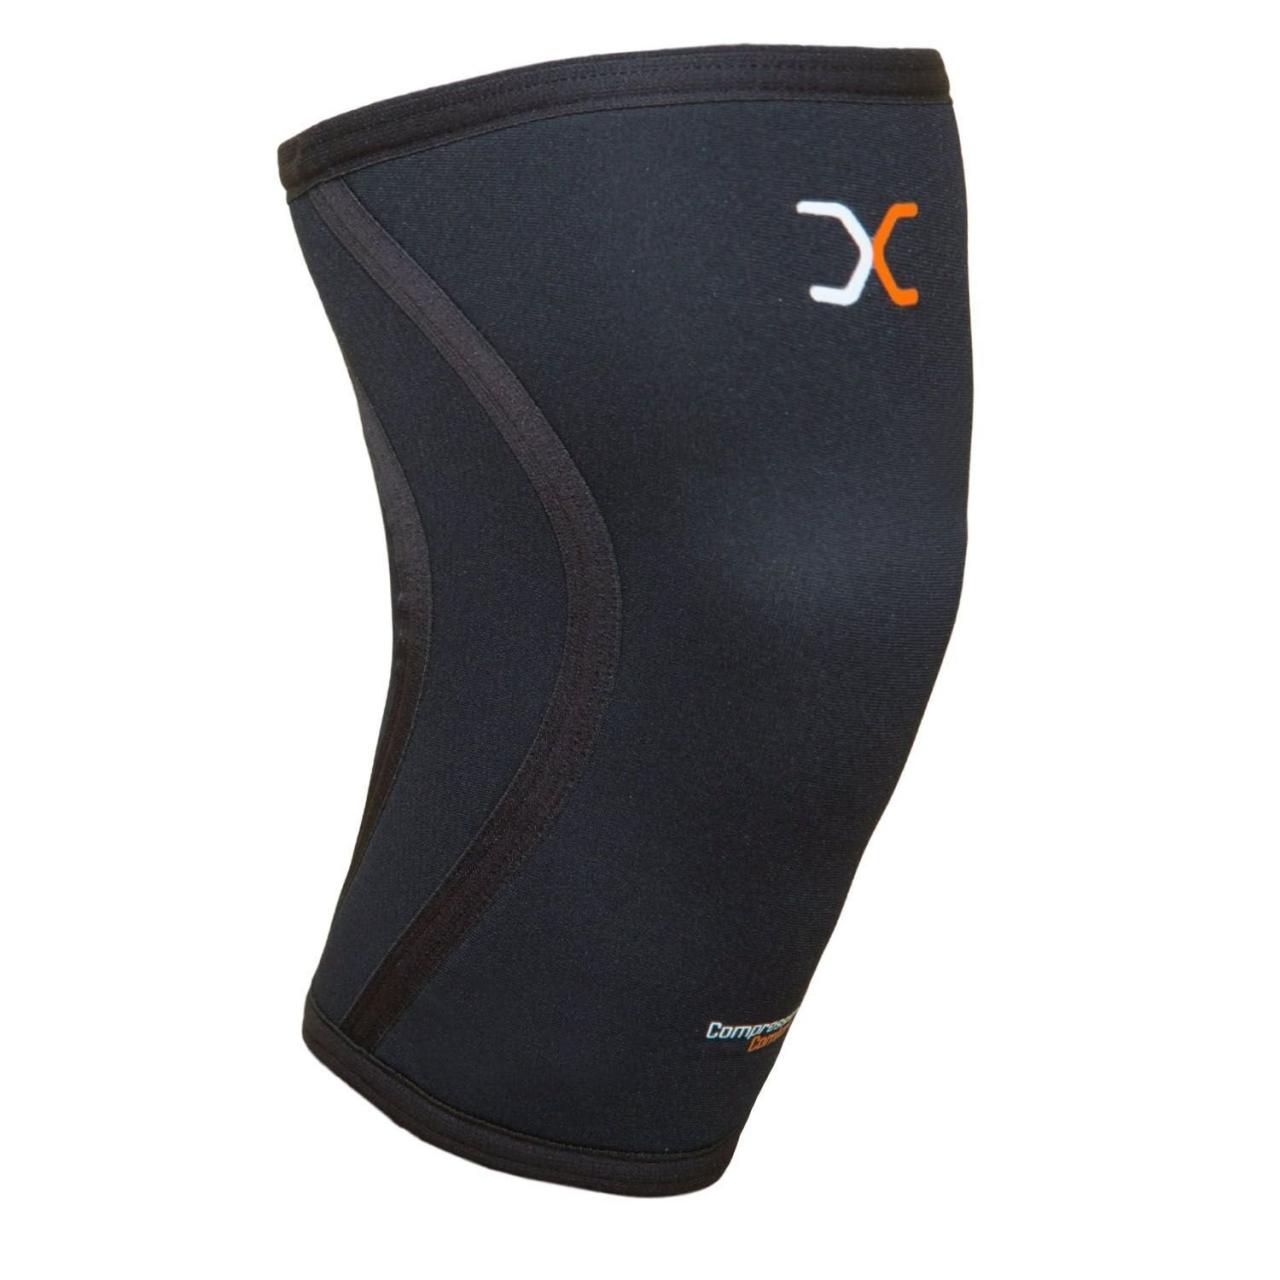 Top 10 Best Known Knee Braces For Running